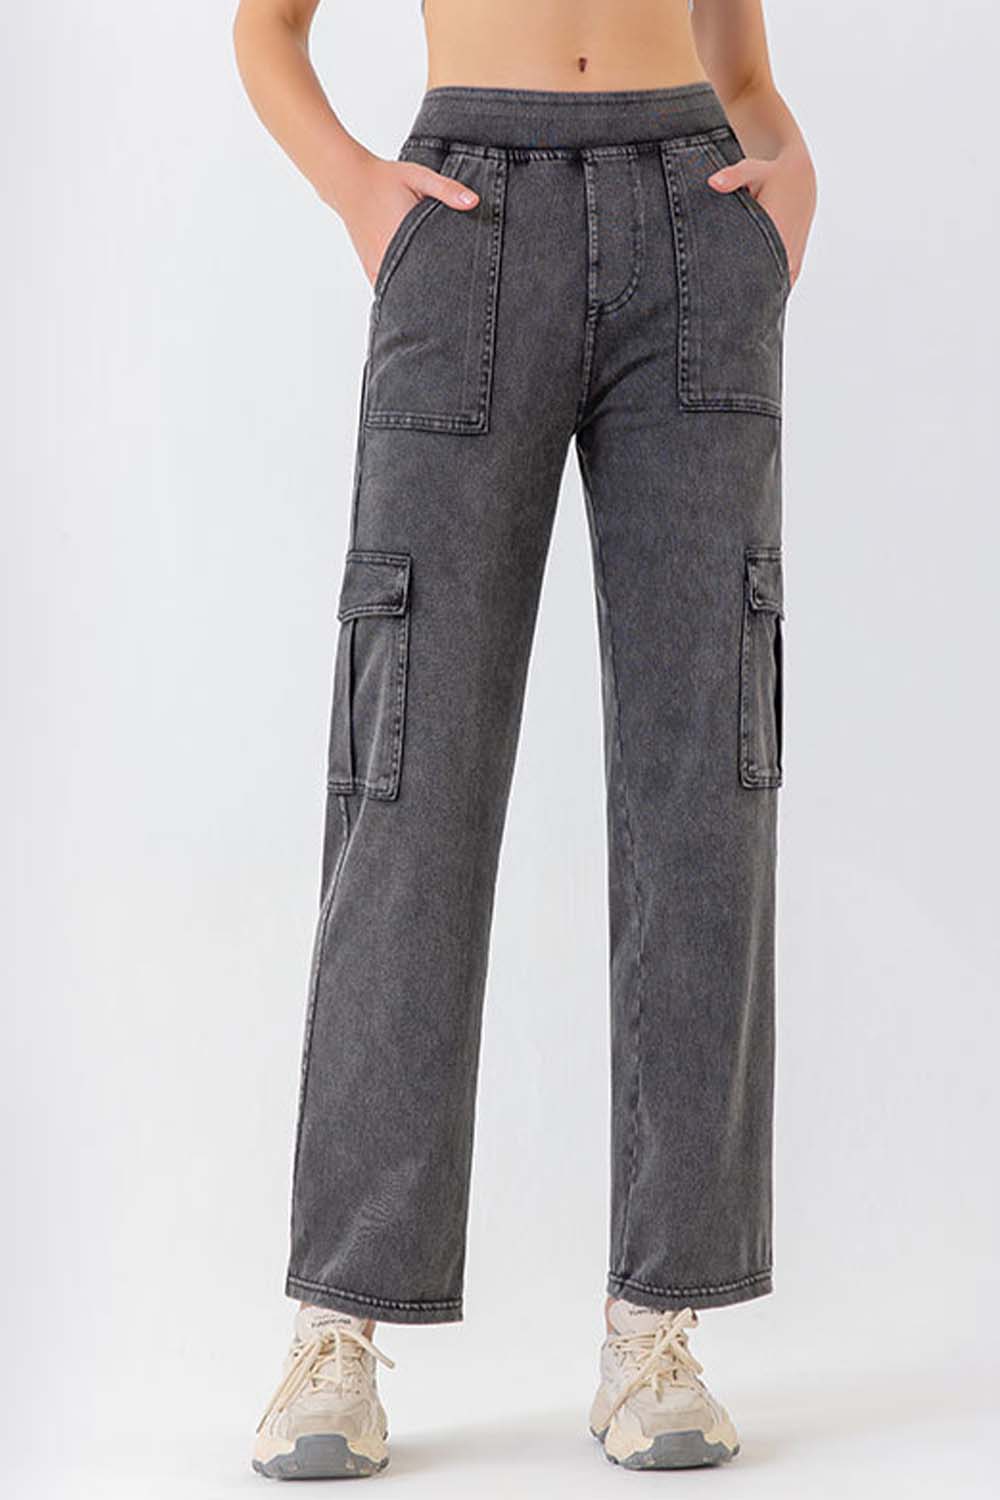 Dark Slate Gray Button Fly Pocketed Long Jeans Sentient Beauty Fashions Apparel & Accessories